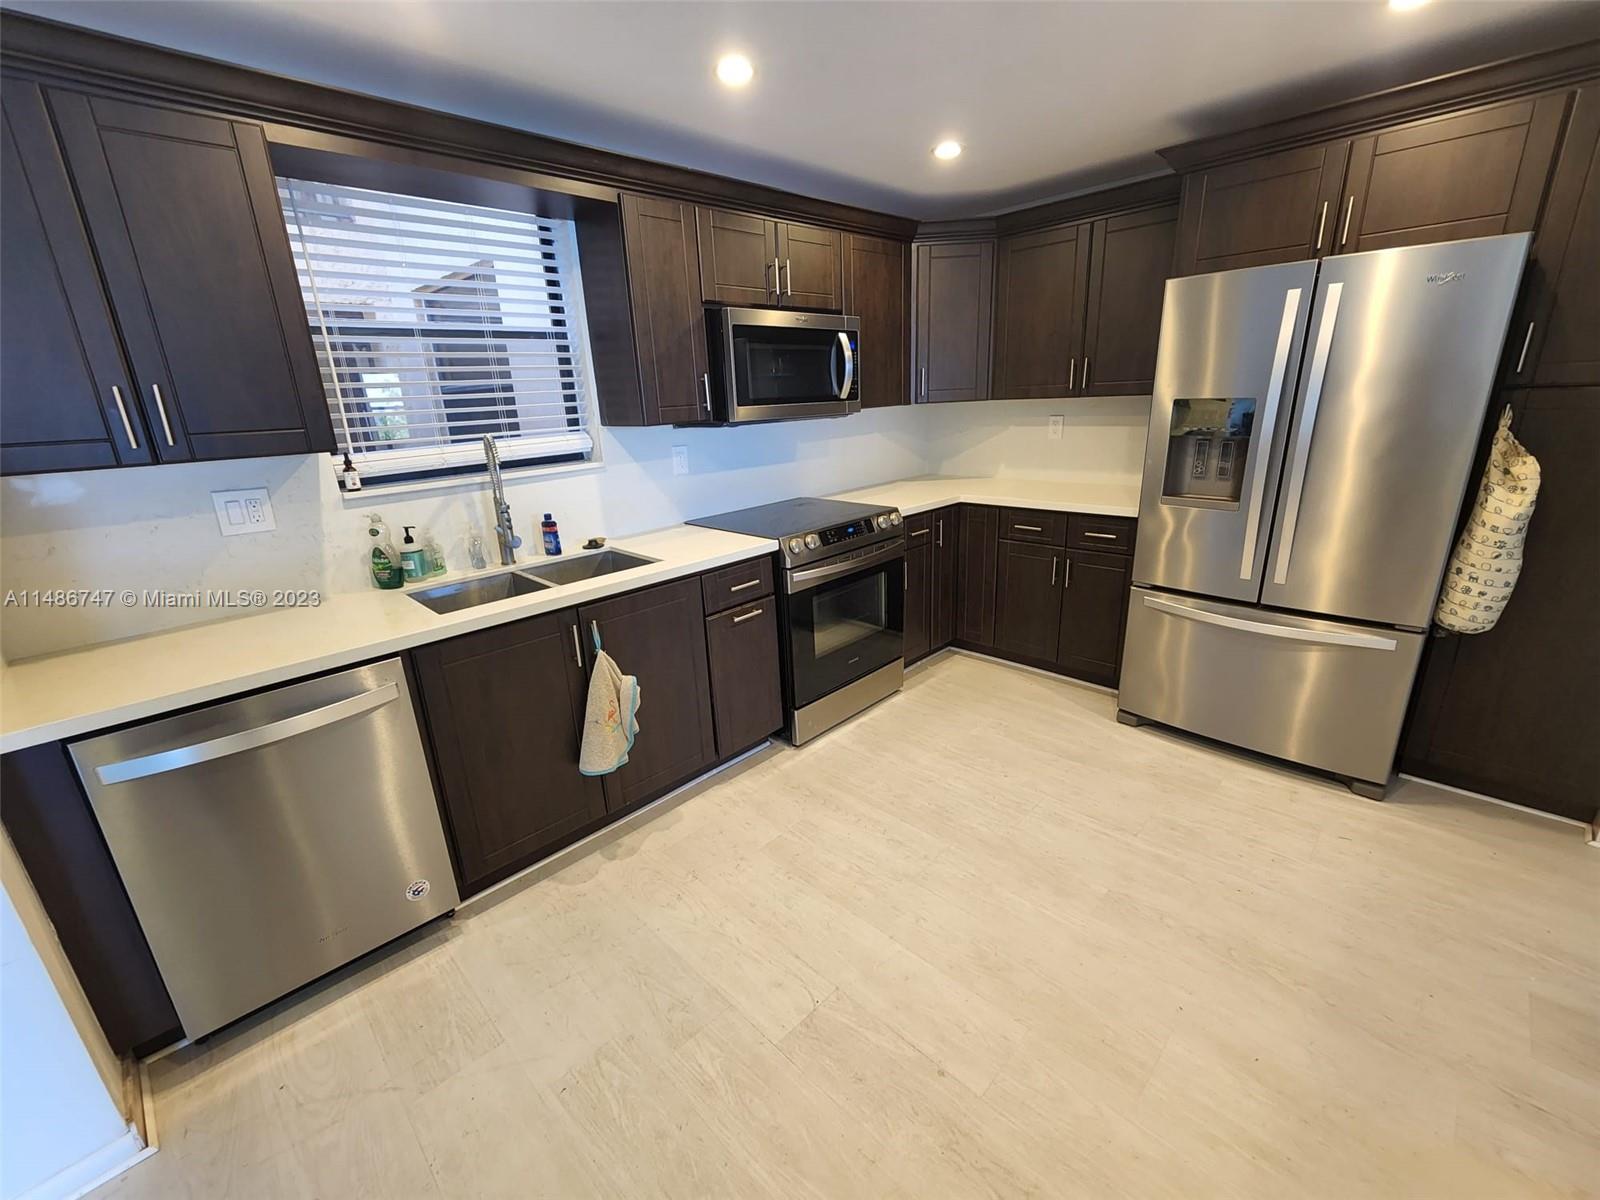 a kitchen with granite countertop a refrigerator stove microwave and sink